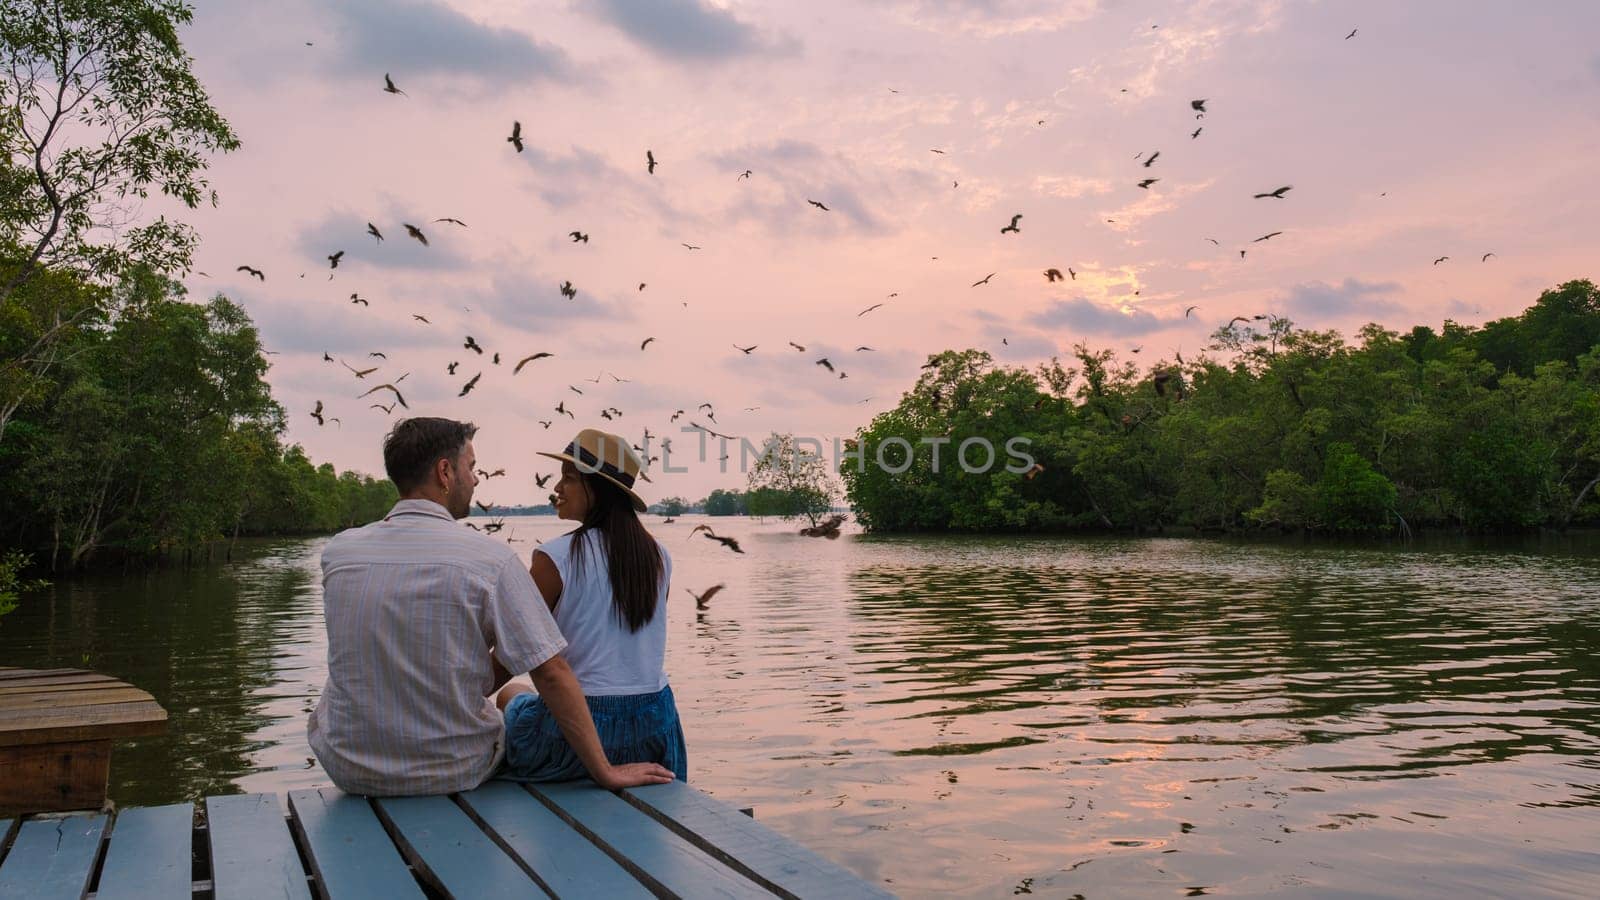 Sea Eagles at sunset in the mangrove of Chantaburi in Thailand, Red backed sea eagle , young couple of men and women watching the sunset on a wooden pier